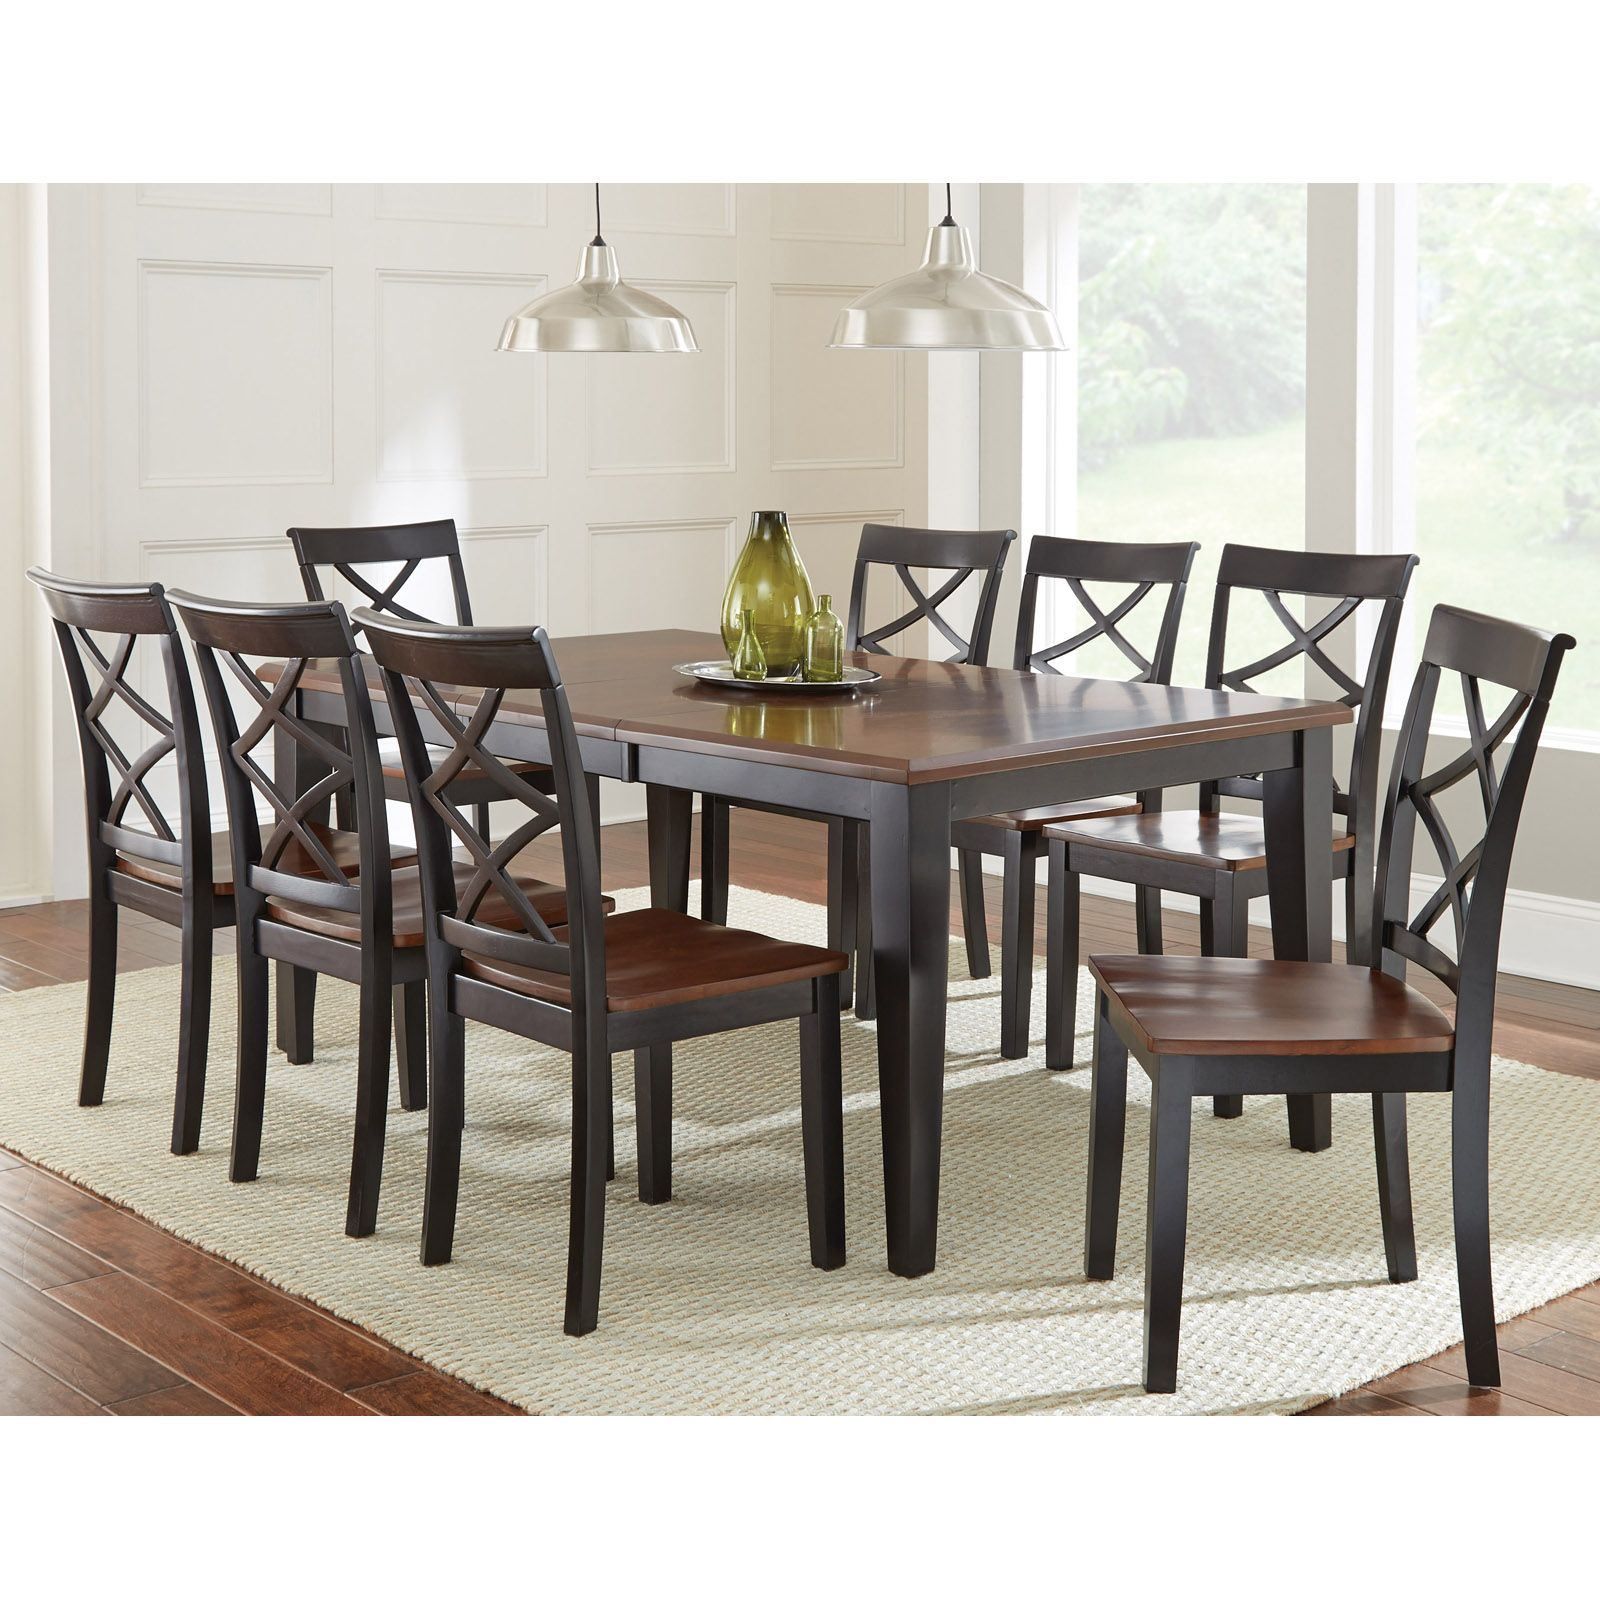 Steve Silver Rani 9 Piece Dining Table Set – Dining Table For Most Recent Silver Dining Tables (View 13 of 20)